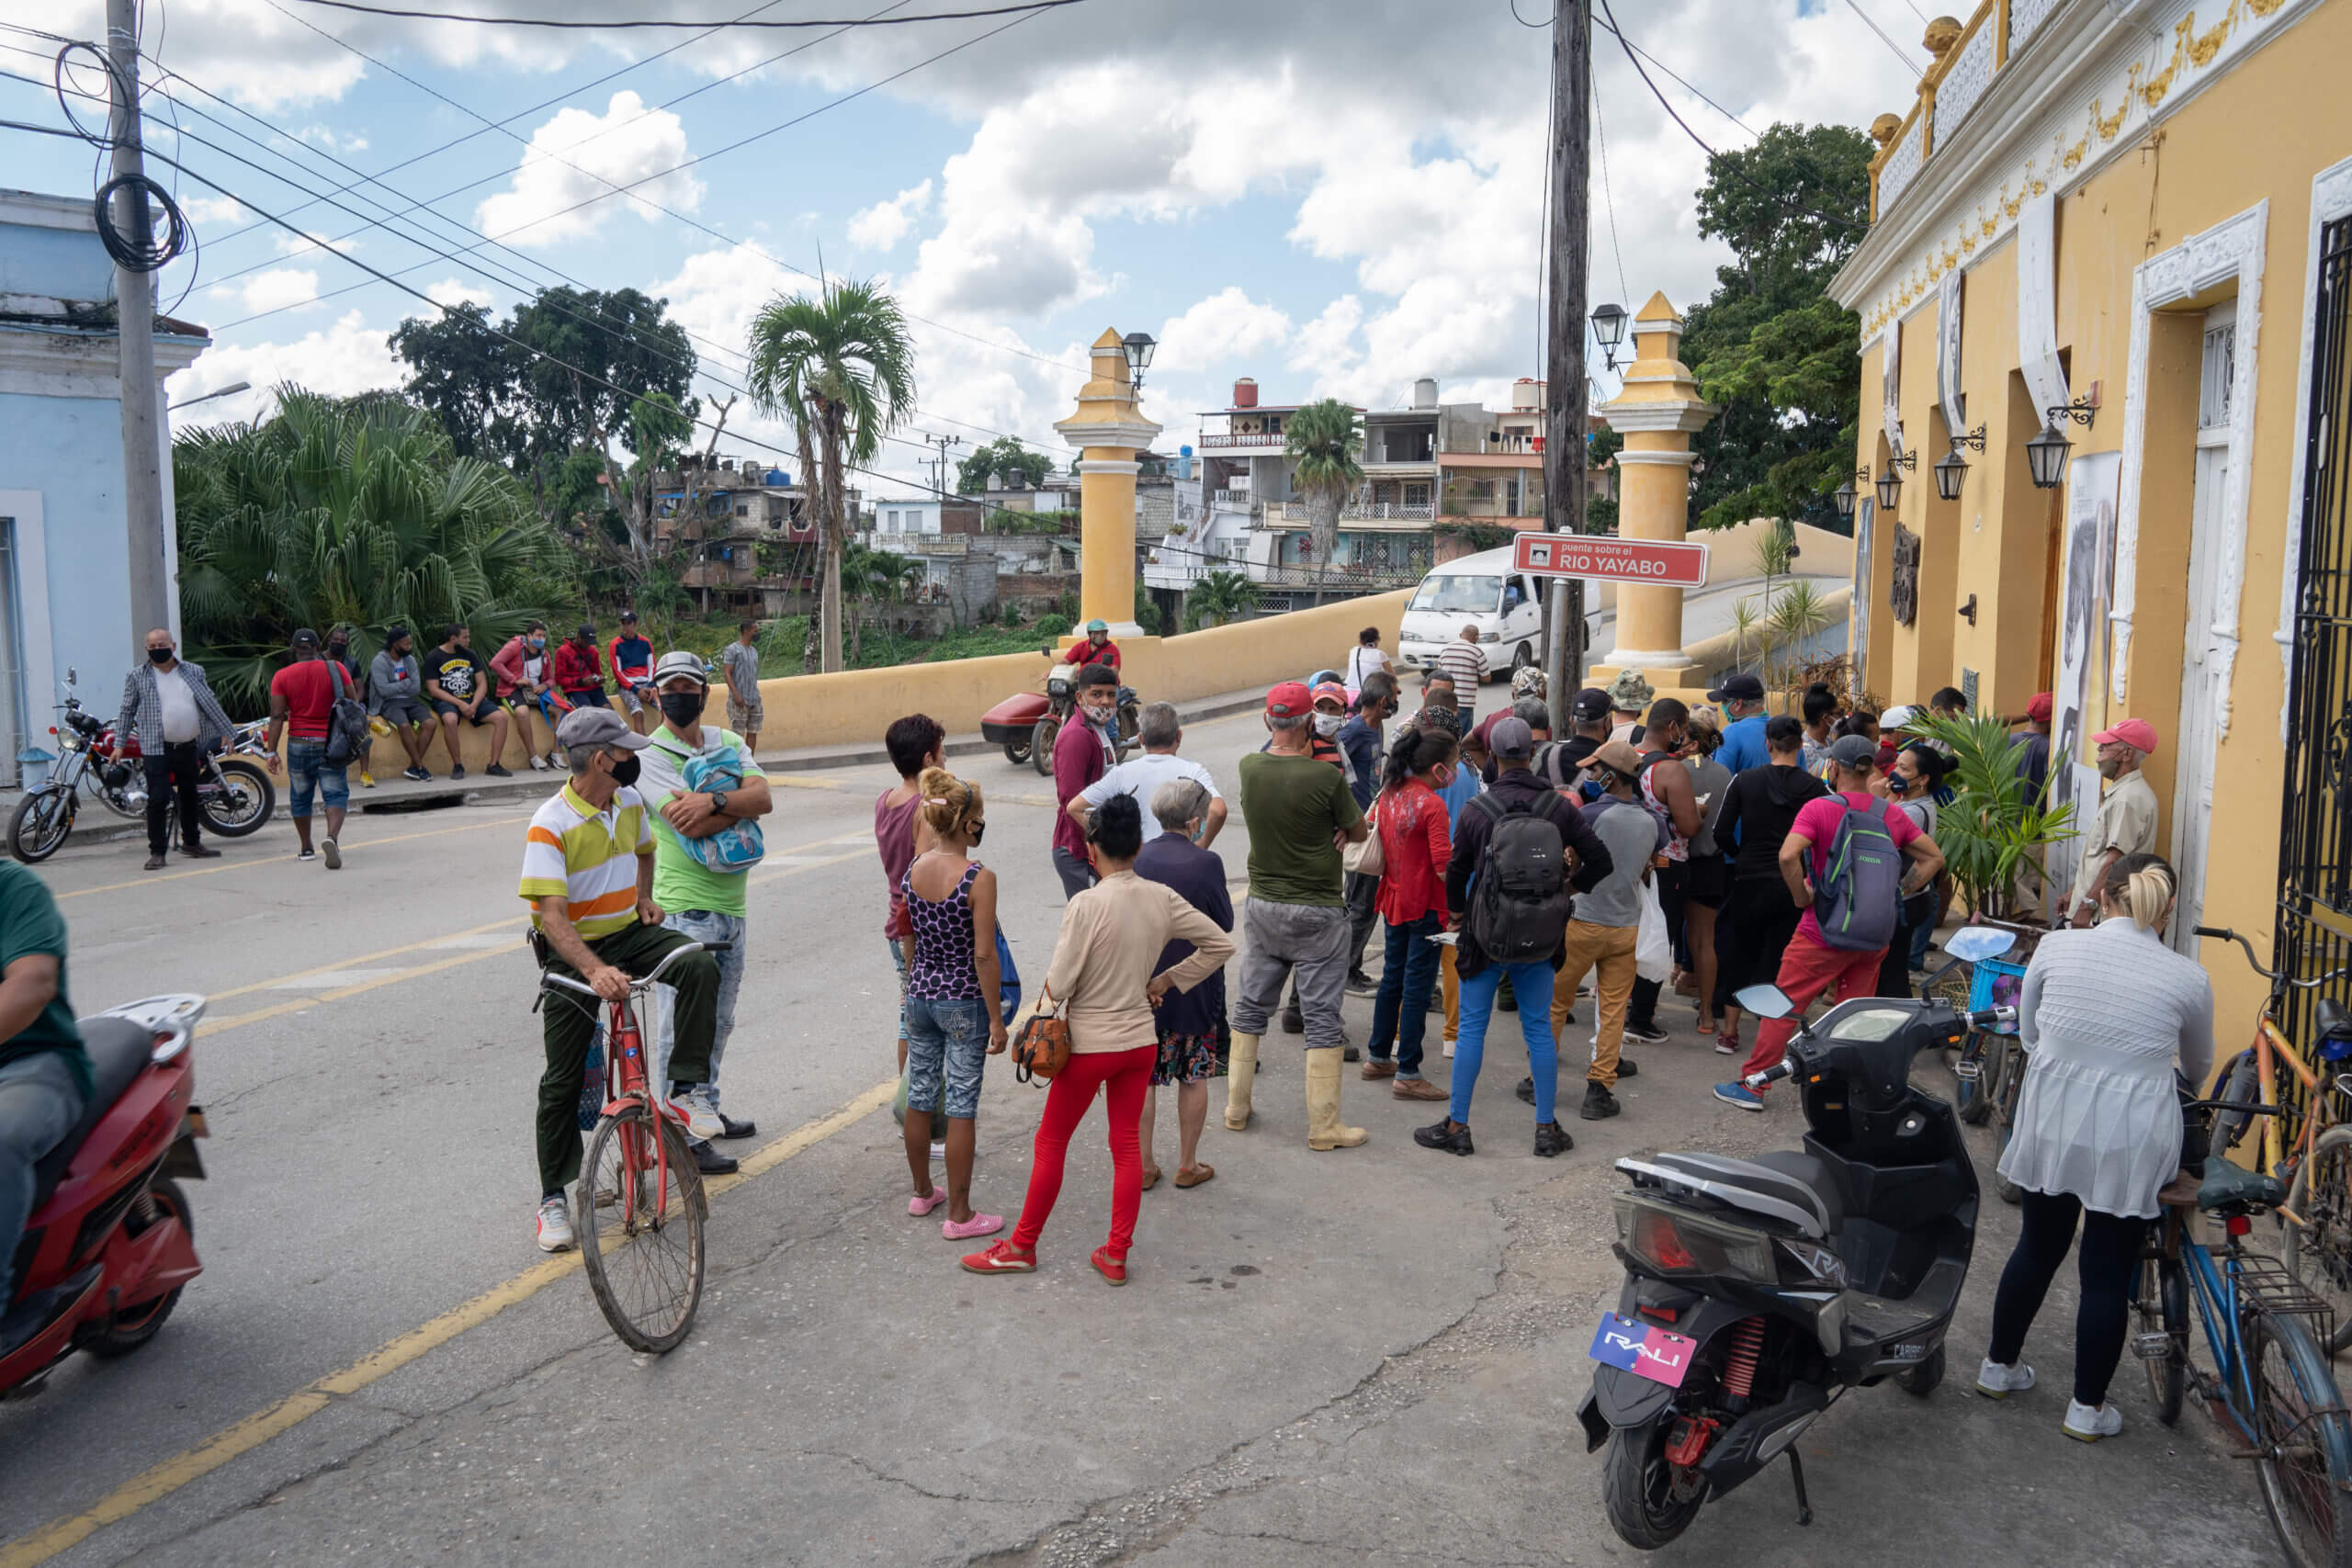 Most Cubans – except a small minority of elites – must queue up for hours each week in order to receive even the basic commodities. Penitents outside the Church of San Lazaro near Havana. © 2022 John D. Elliott • www.TheHumanPulse.com